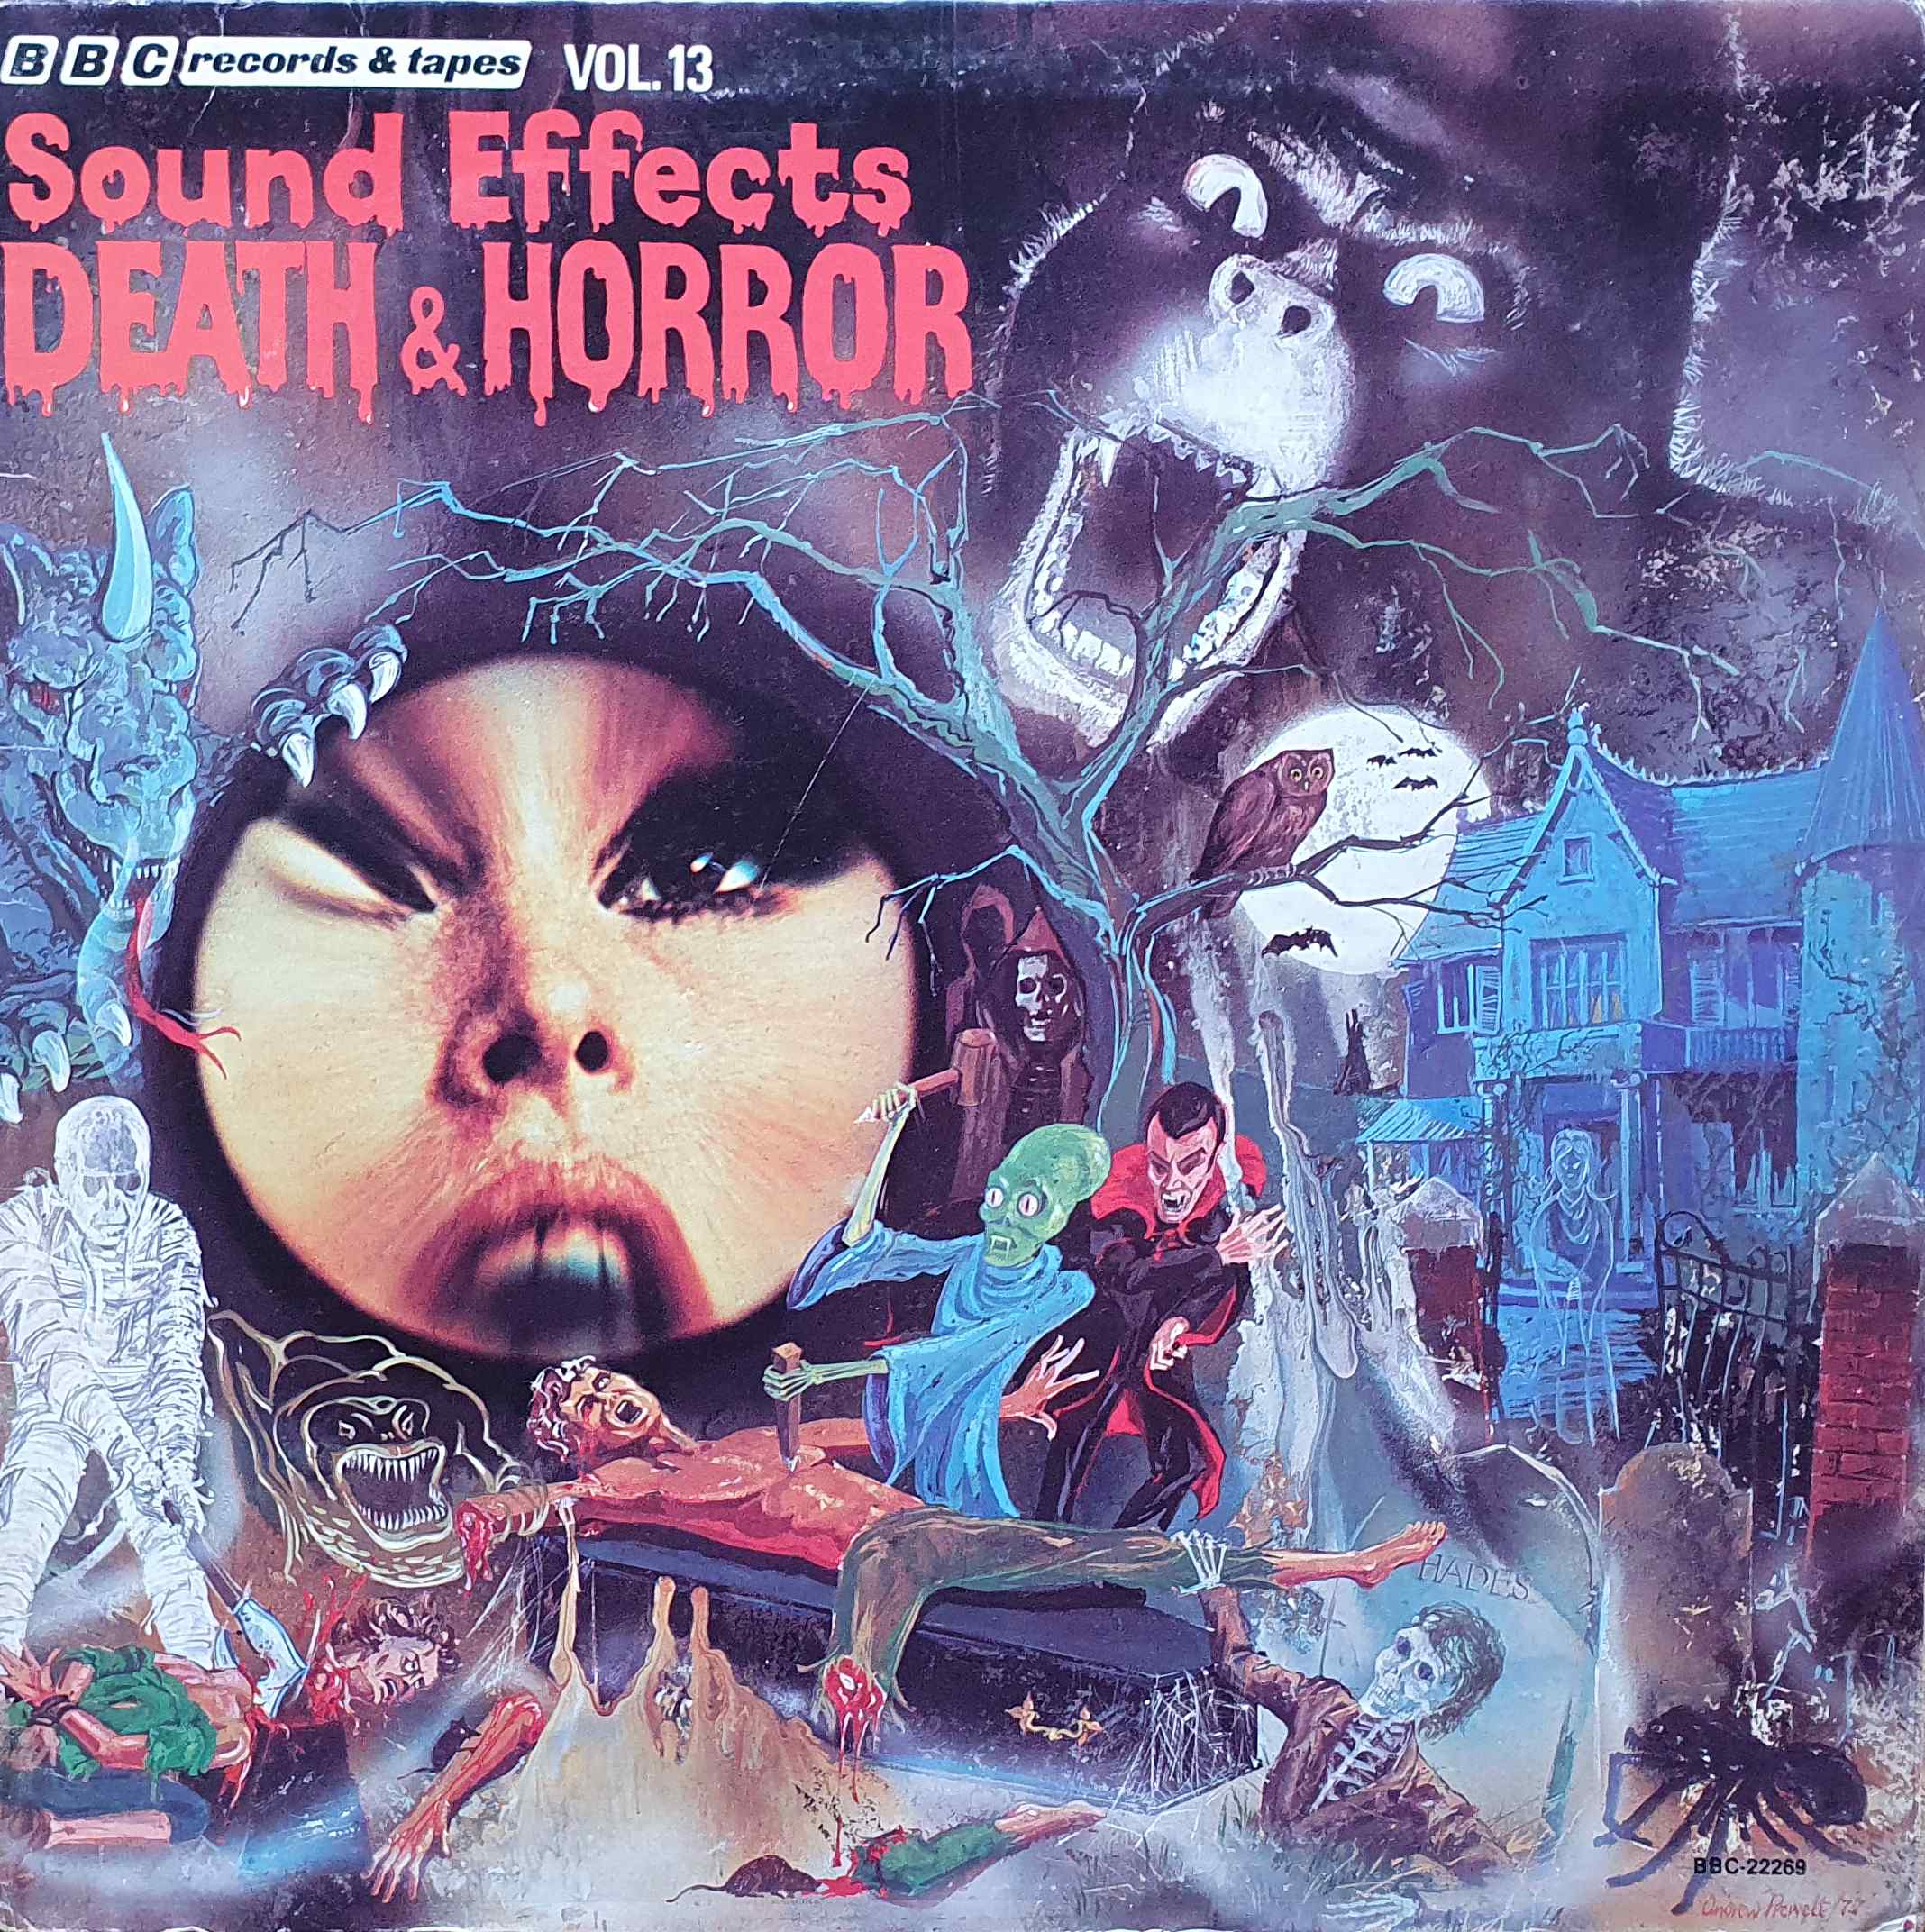 Picture of BBC - 22269 Death & horror sound effects by artist Various from the BBC albums - Records and Tapes library